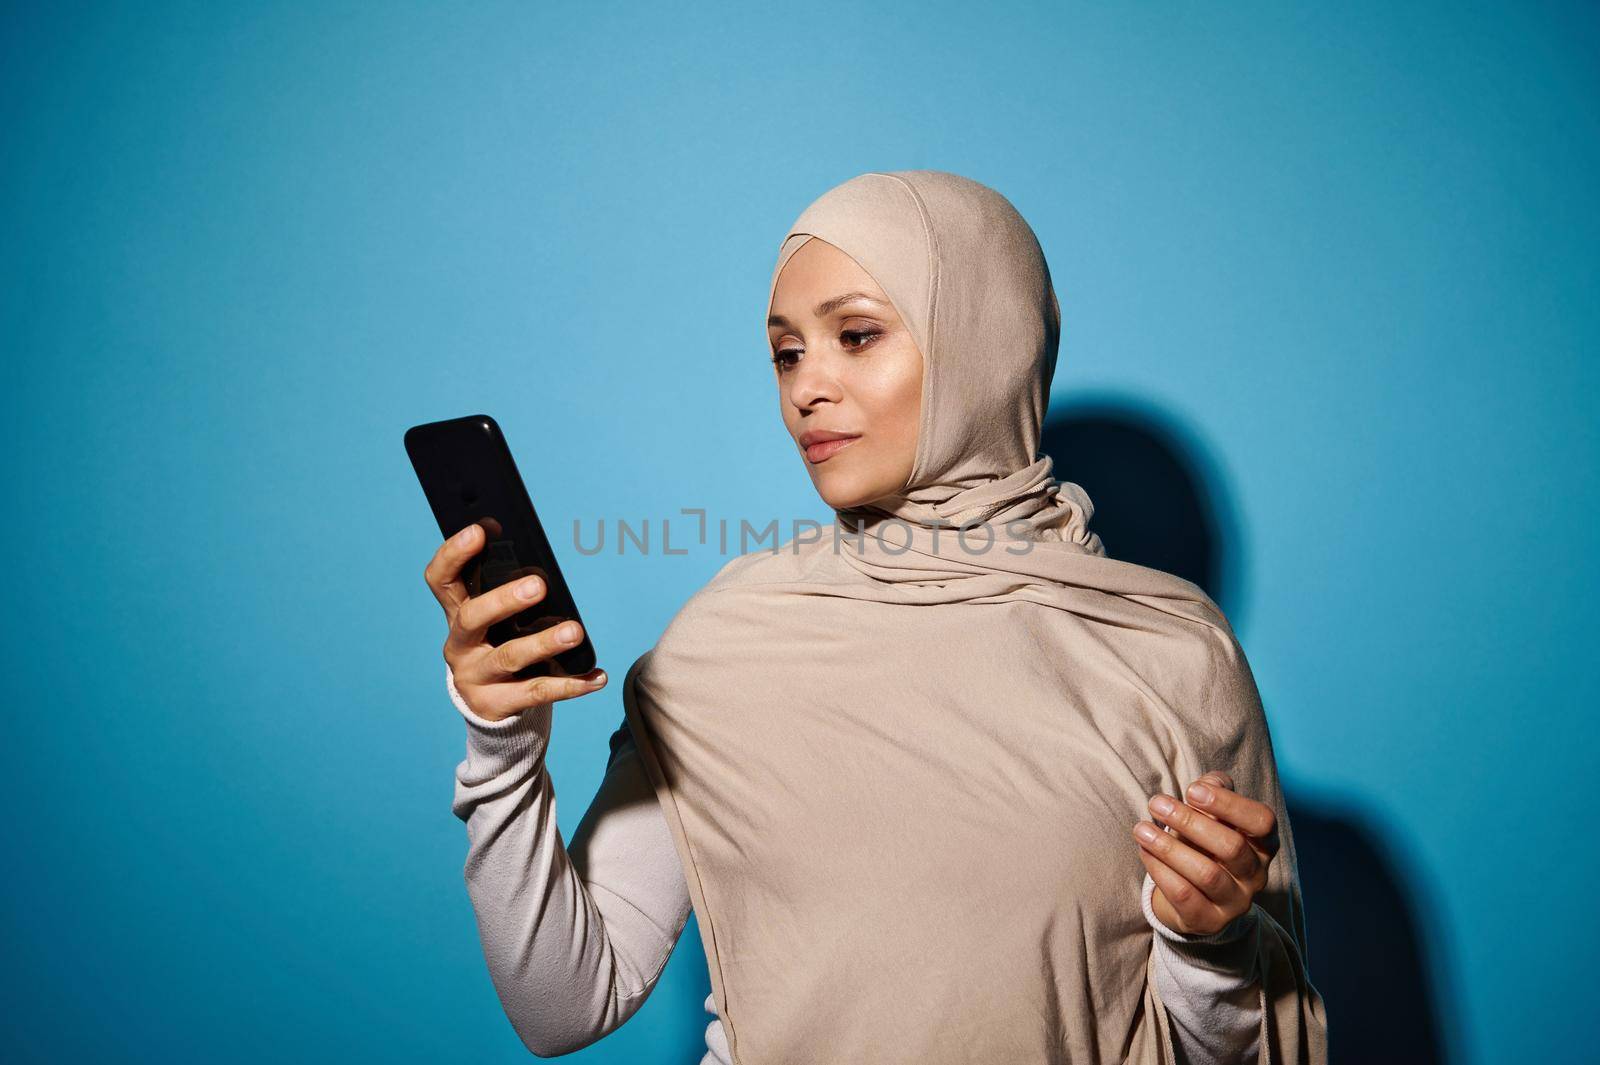 Young woman of oriental appearance in beige hijab holding a smartphone in the hand, isolated on blue background by artgf